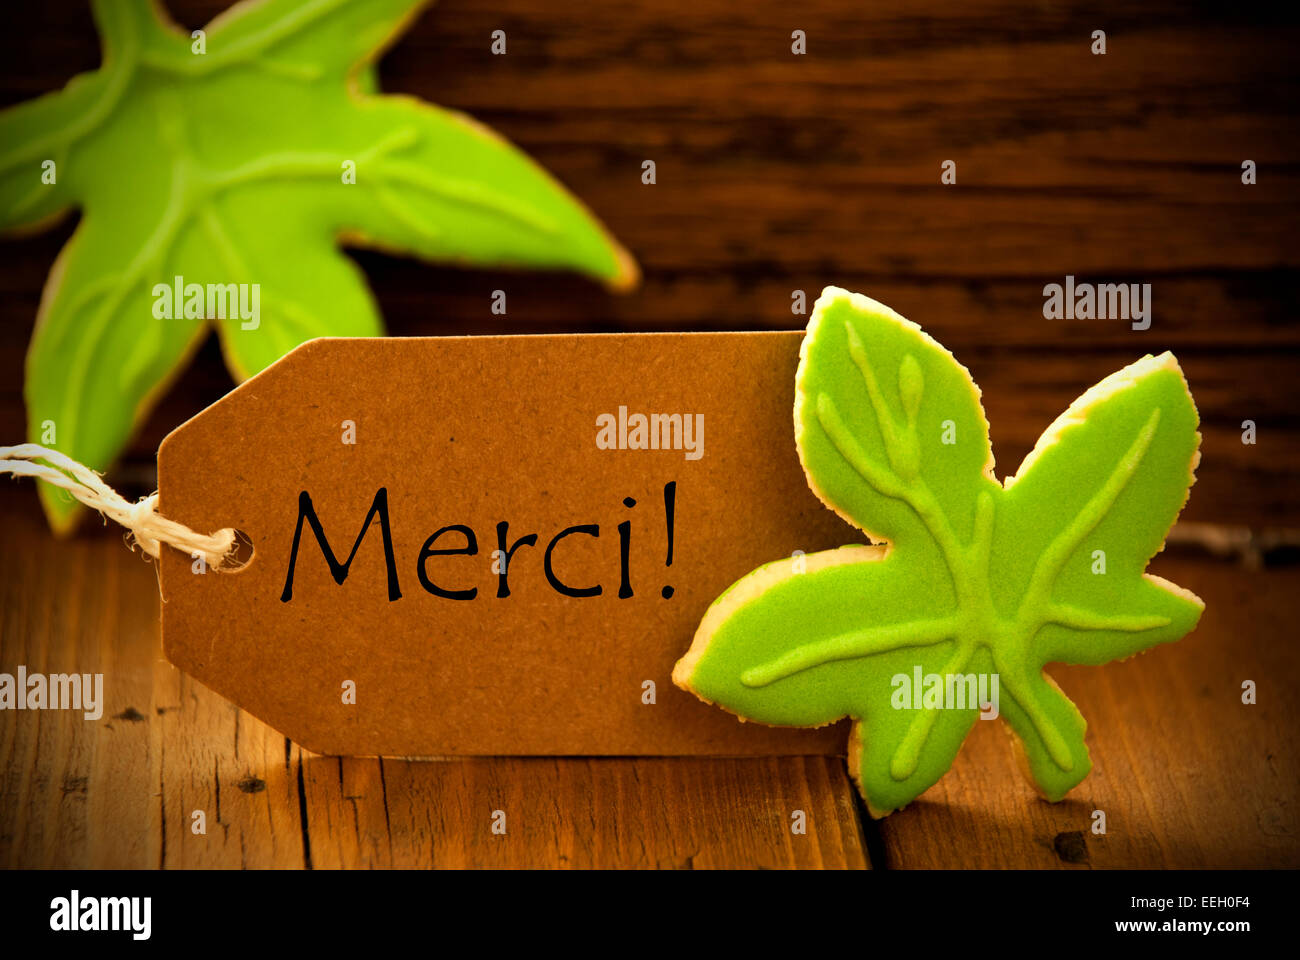 Brown Organic Label With French Text Merci On Wooden Background With Two Leaf Cookies And Frame Stock Photo